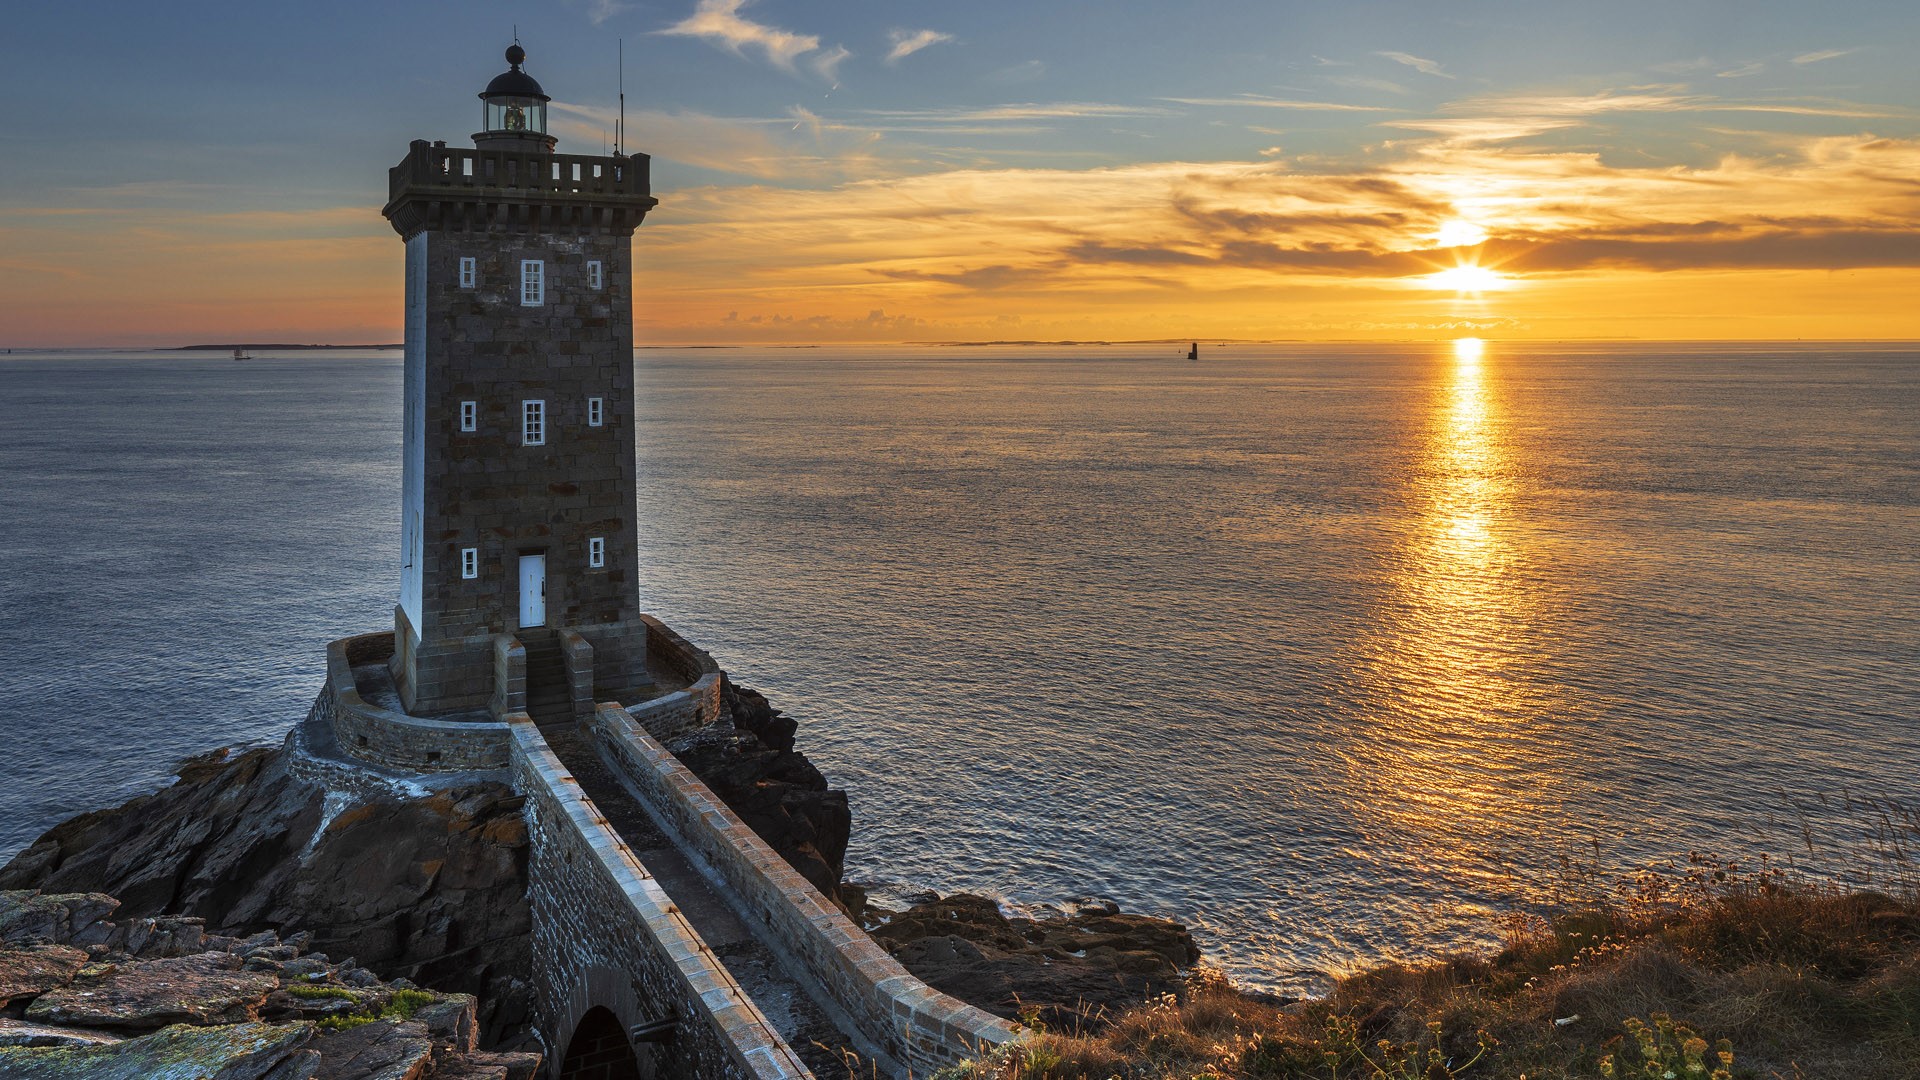 Kermorvan lighthouse at sunset Le Conquet Finistre Brittany